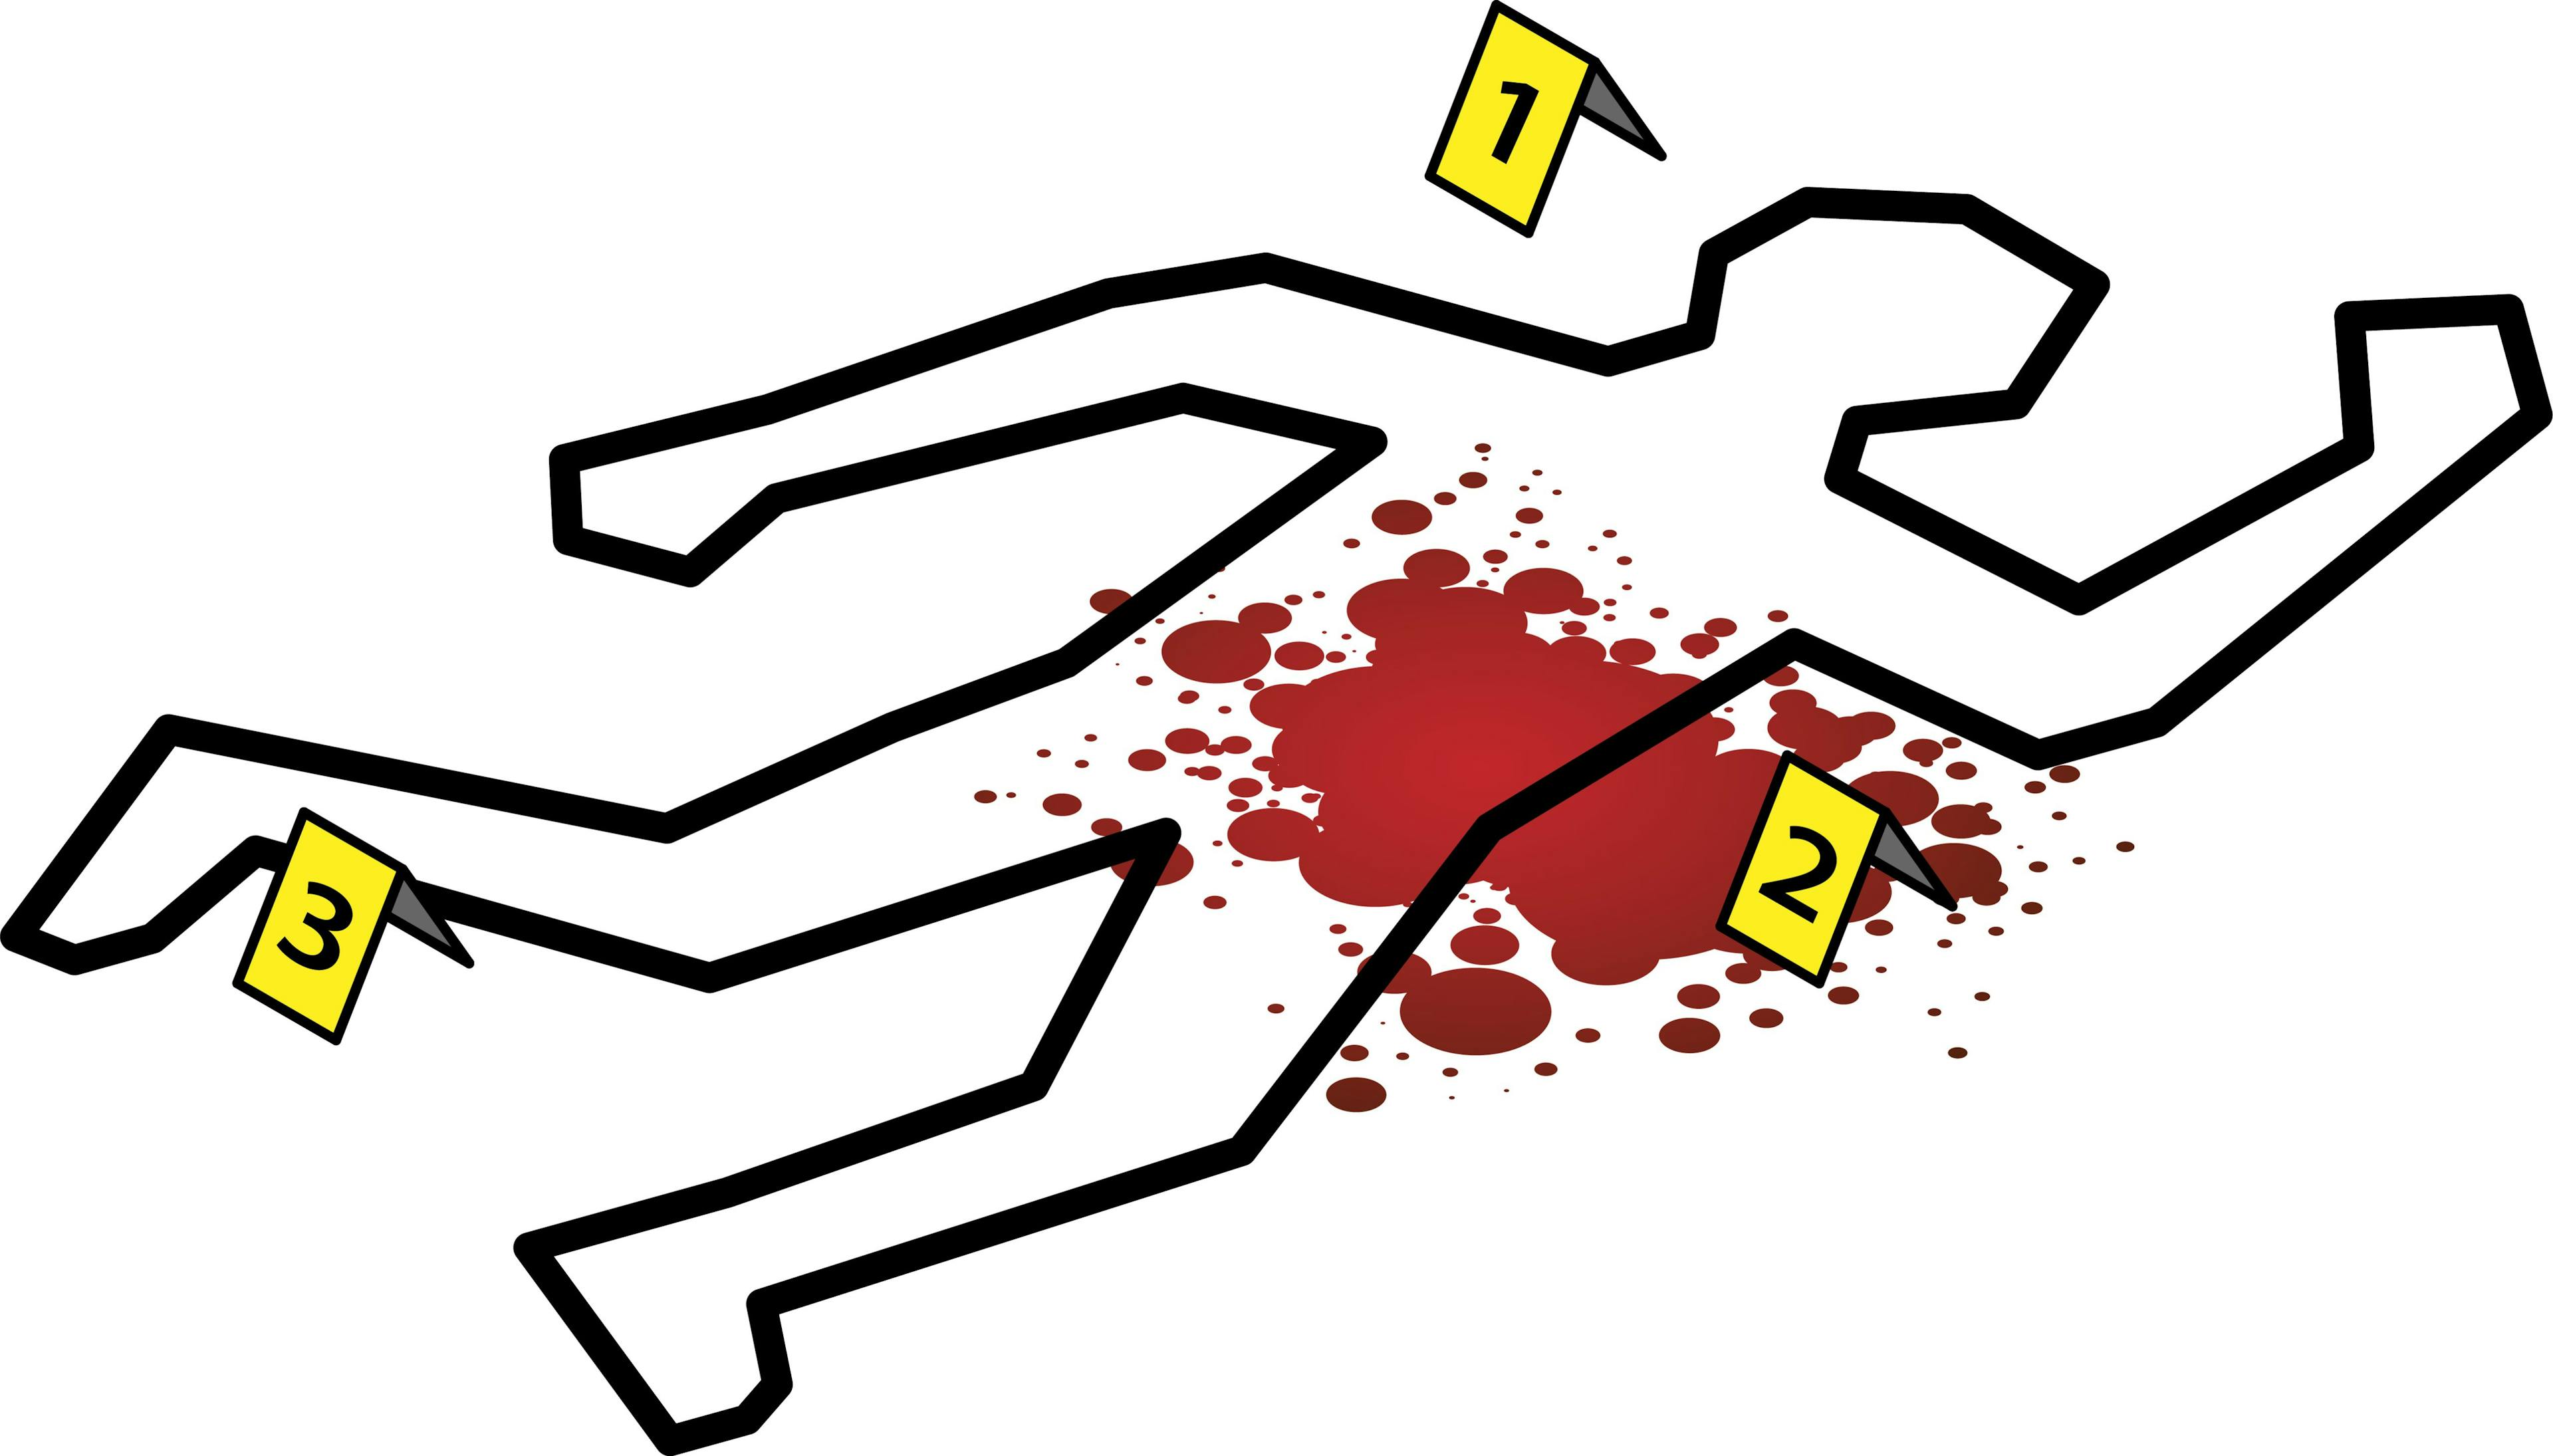 Crime scene with blood stain and yellow evidence flags © Zern Liew - stock.adobe.com